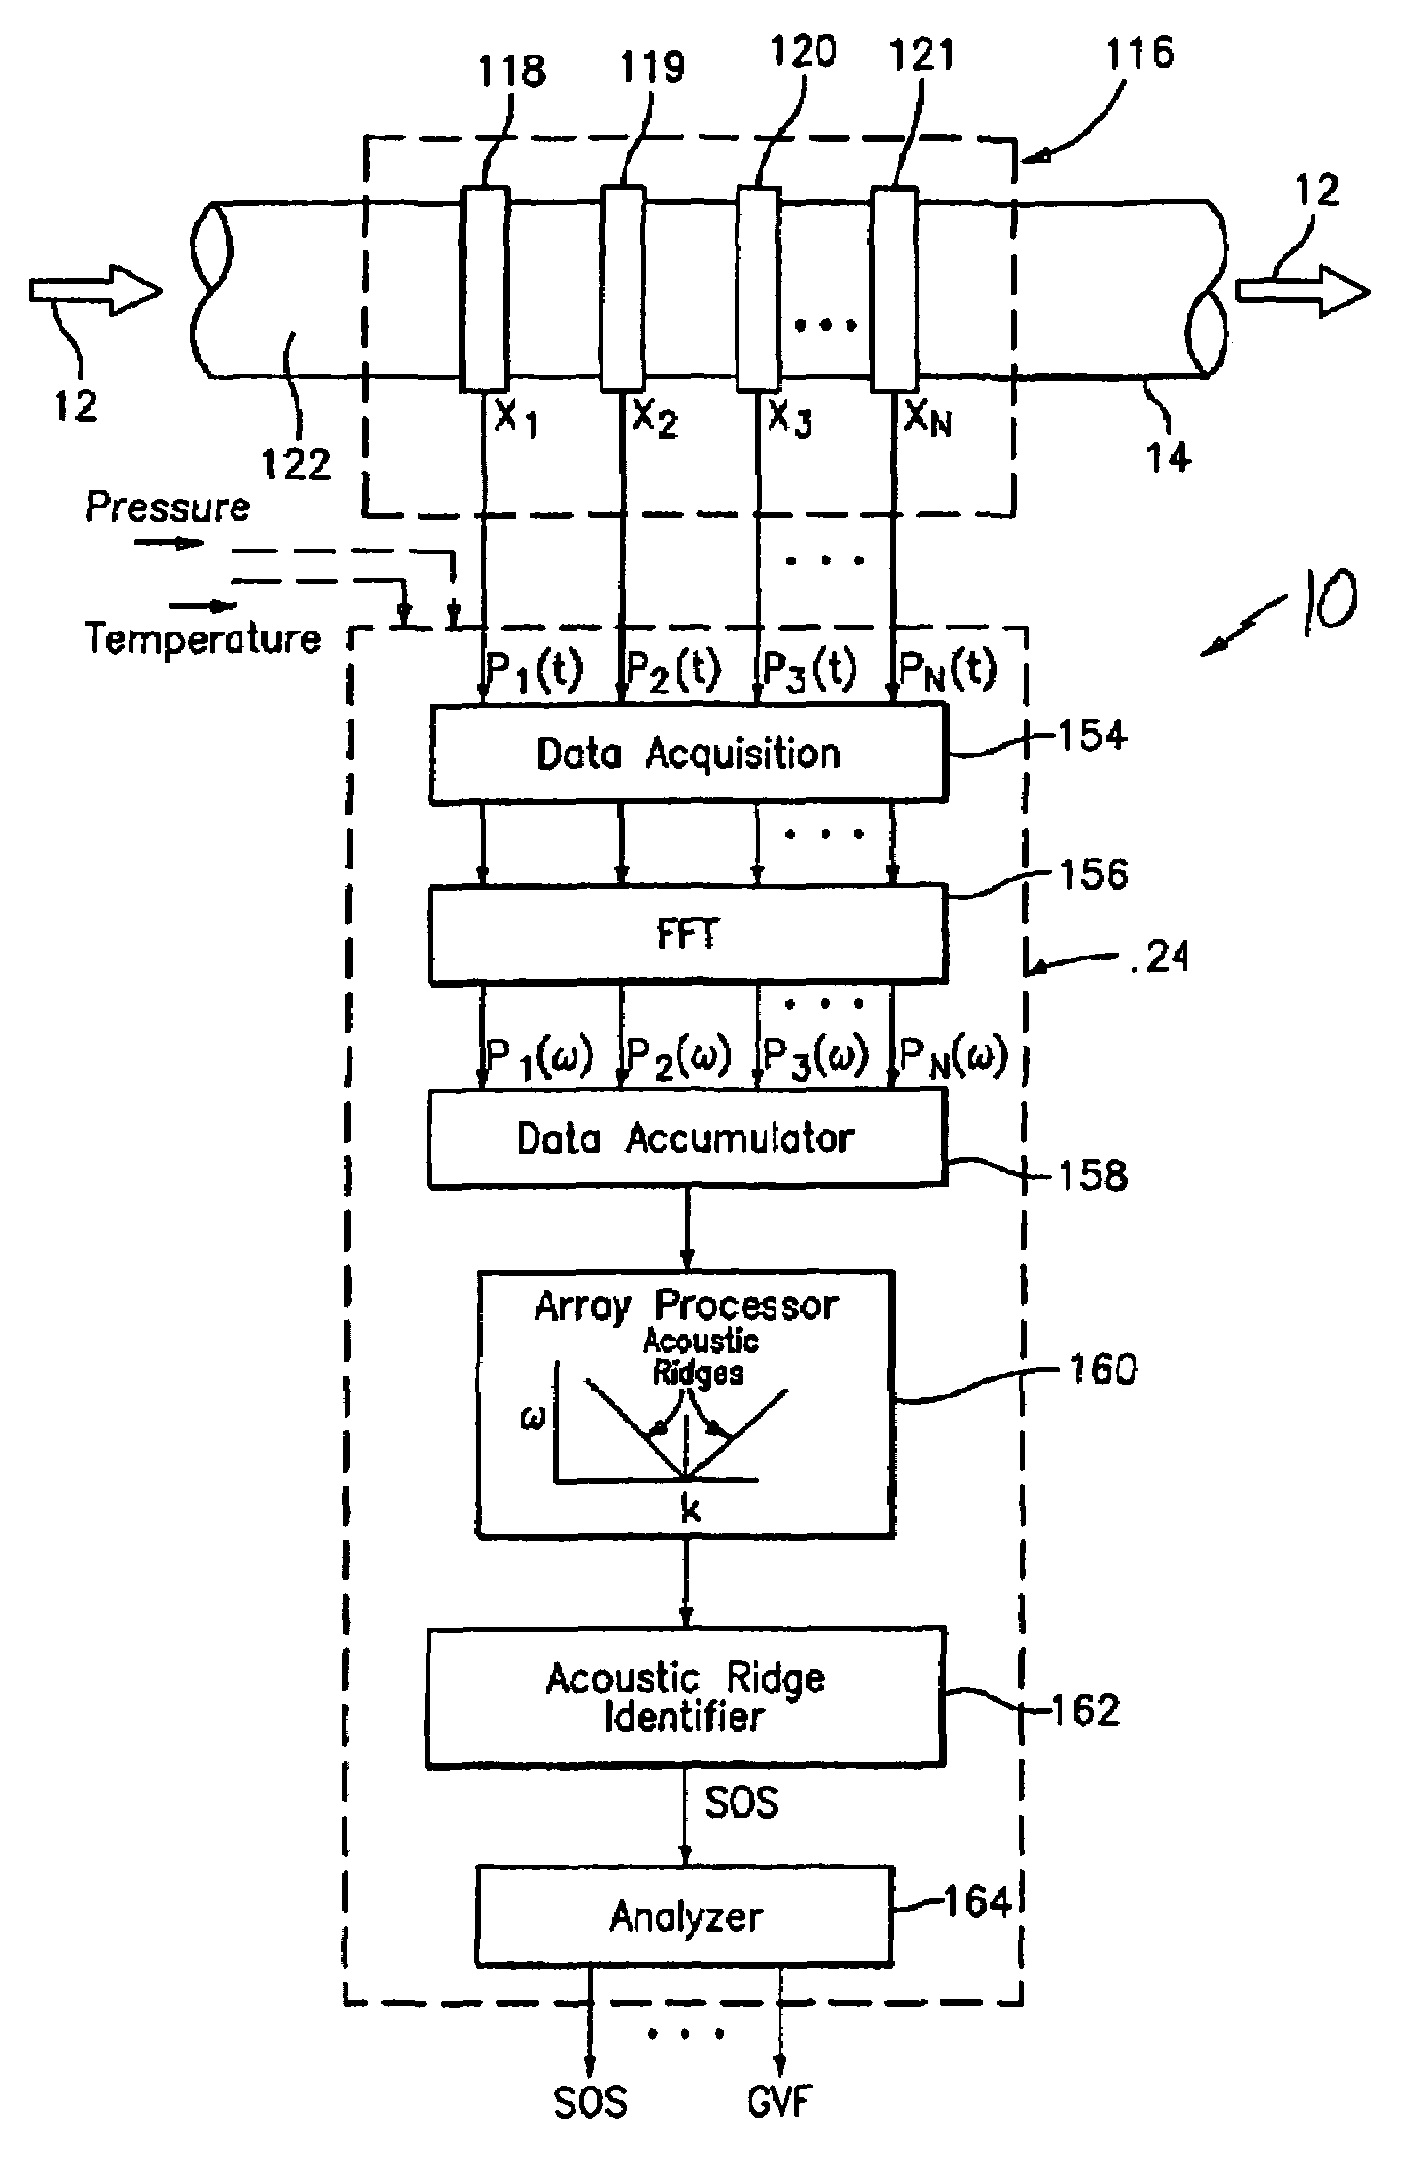 Apparatus and method for providing a fluid cut measurement of a multi-liquid mixture compensated for entrained gas